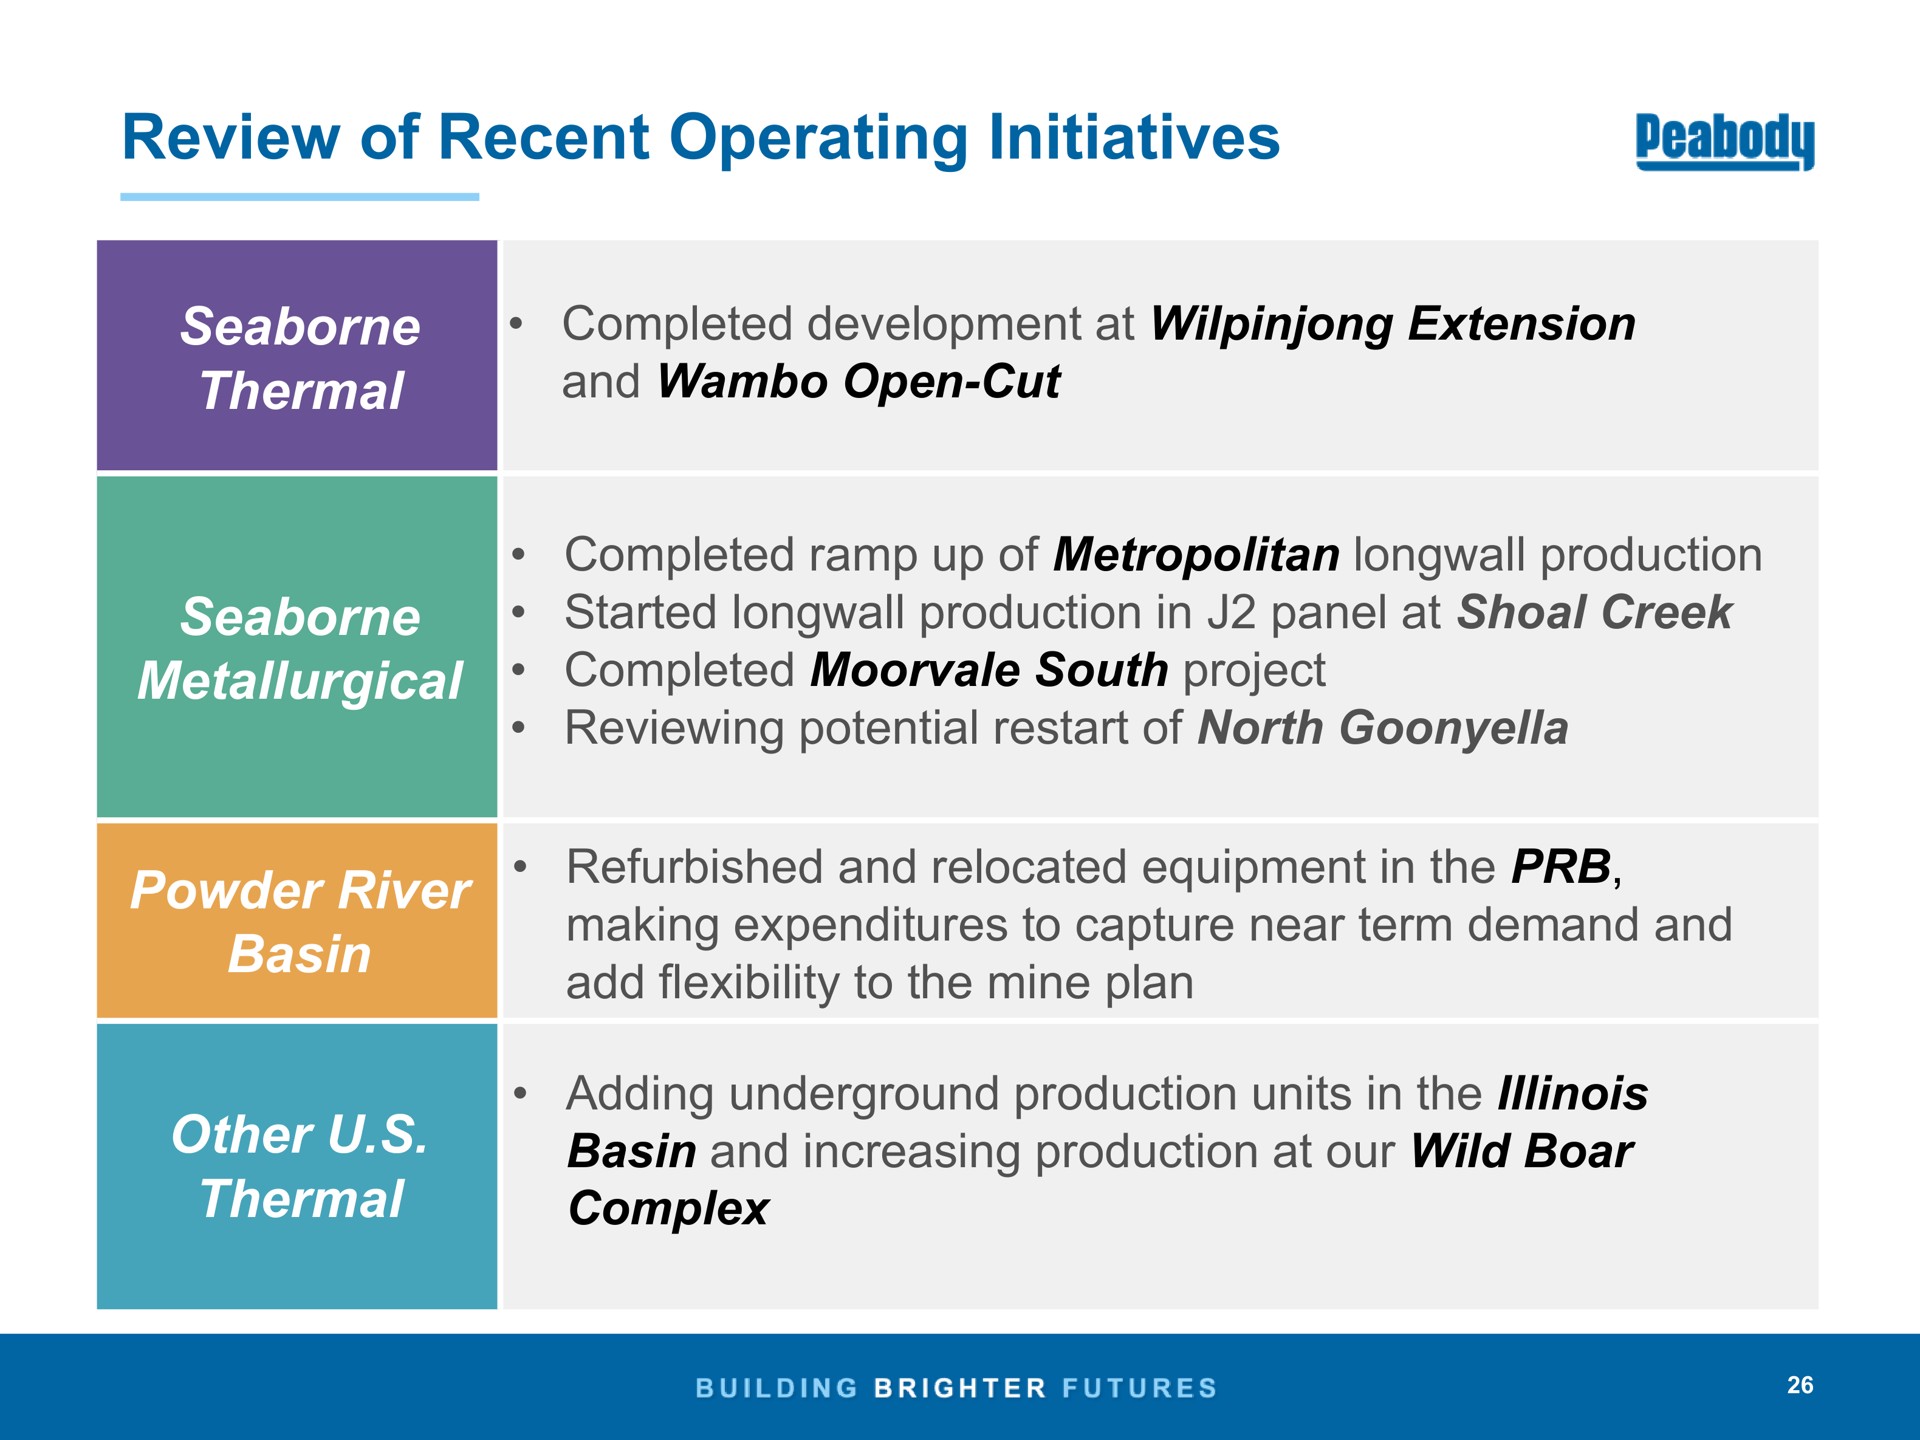 review of recent operating initiatives thermal completed development at extension and open cut metallurgical completed ramp up of metropolitan production started production in panel at shoal creek completed south project reviewing potential restart of north powder river basin refurbished and relocated equipment in the making expenditures to capture near term demand and add flexibility to the mine plan other thermal adding underground production units in the basin and increasing production at our wild boar complex | Peabody Energy